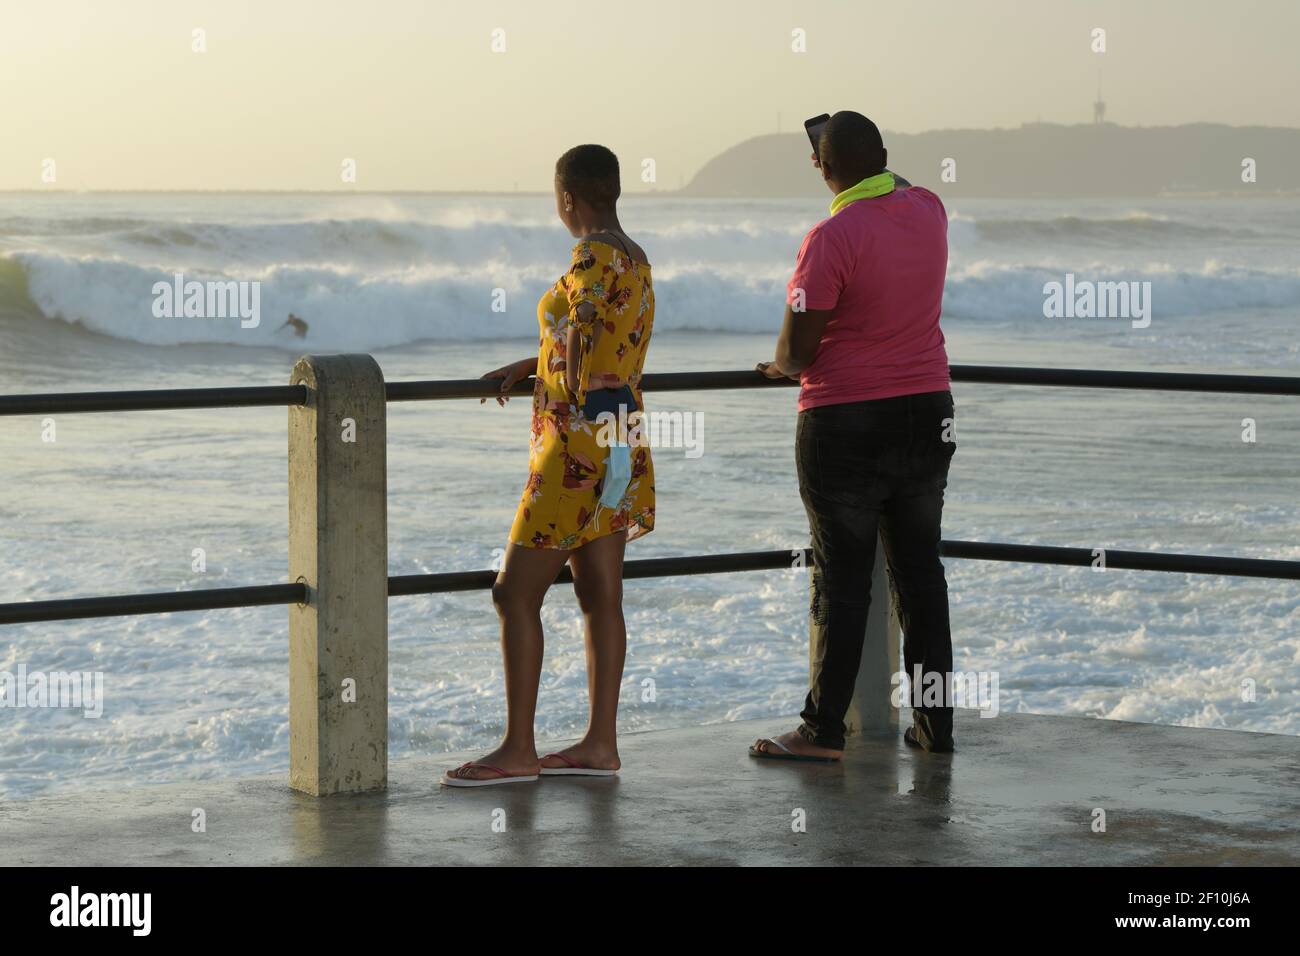 Adult couple, man, woman, standing on pier, looking at sea, ethnic, local tourist, Durban, South Africa, seaside holiday, beach vacation, partners Stock Photo